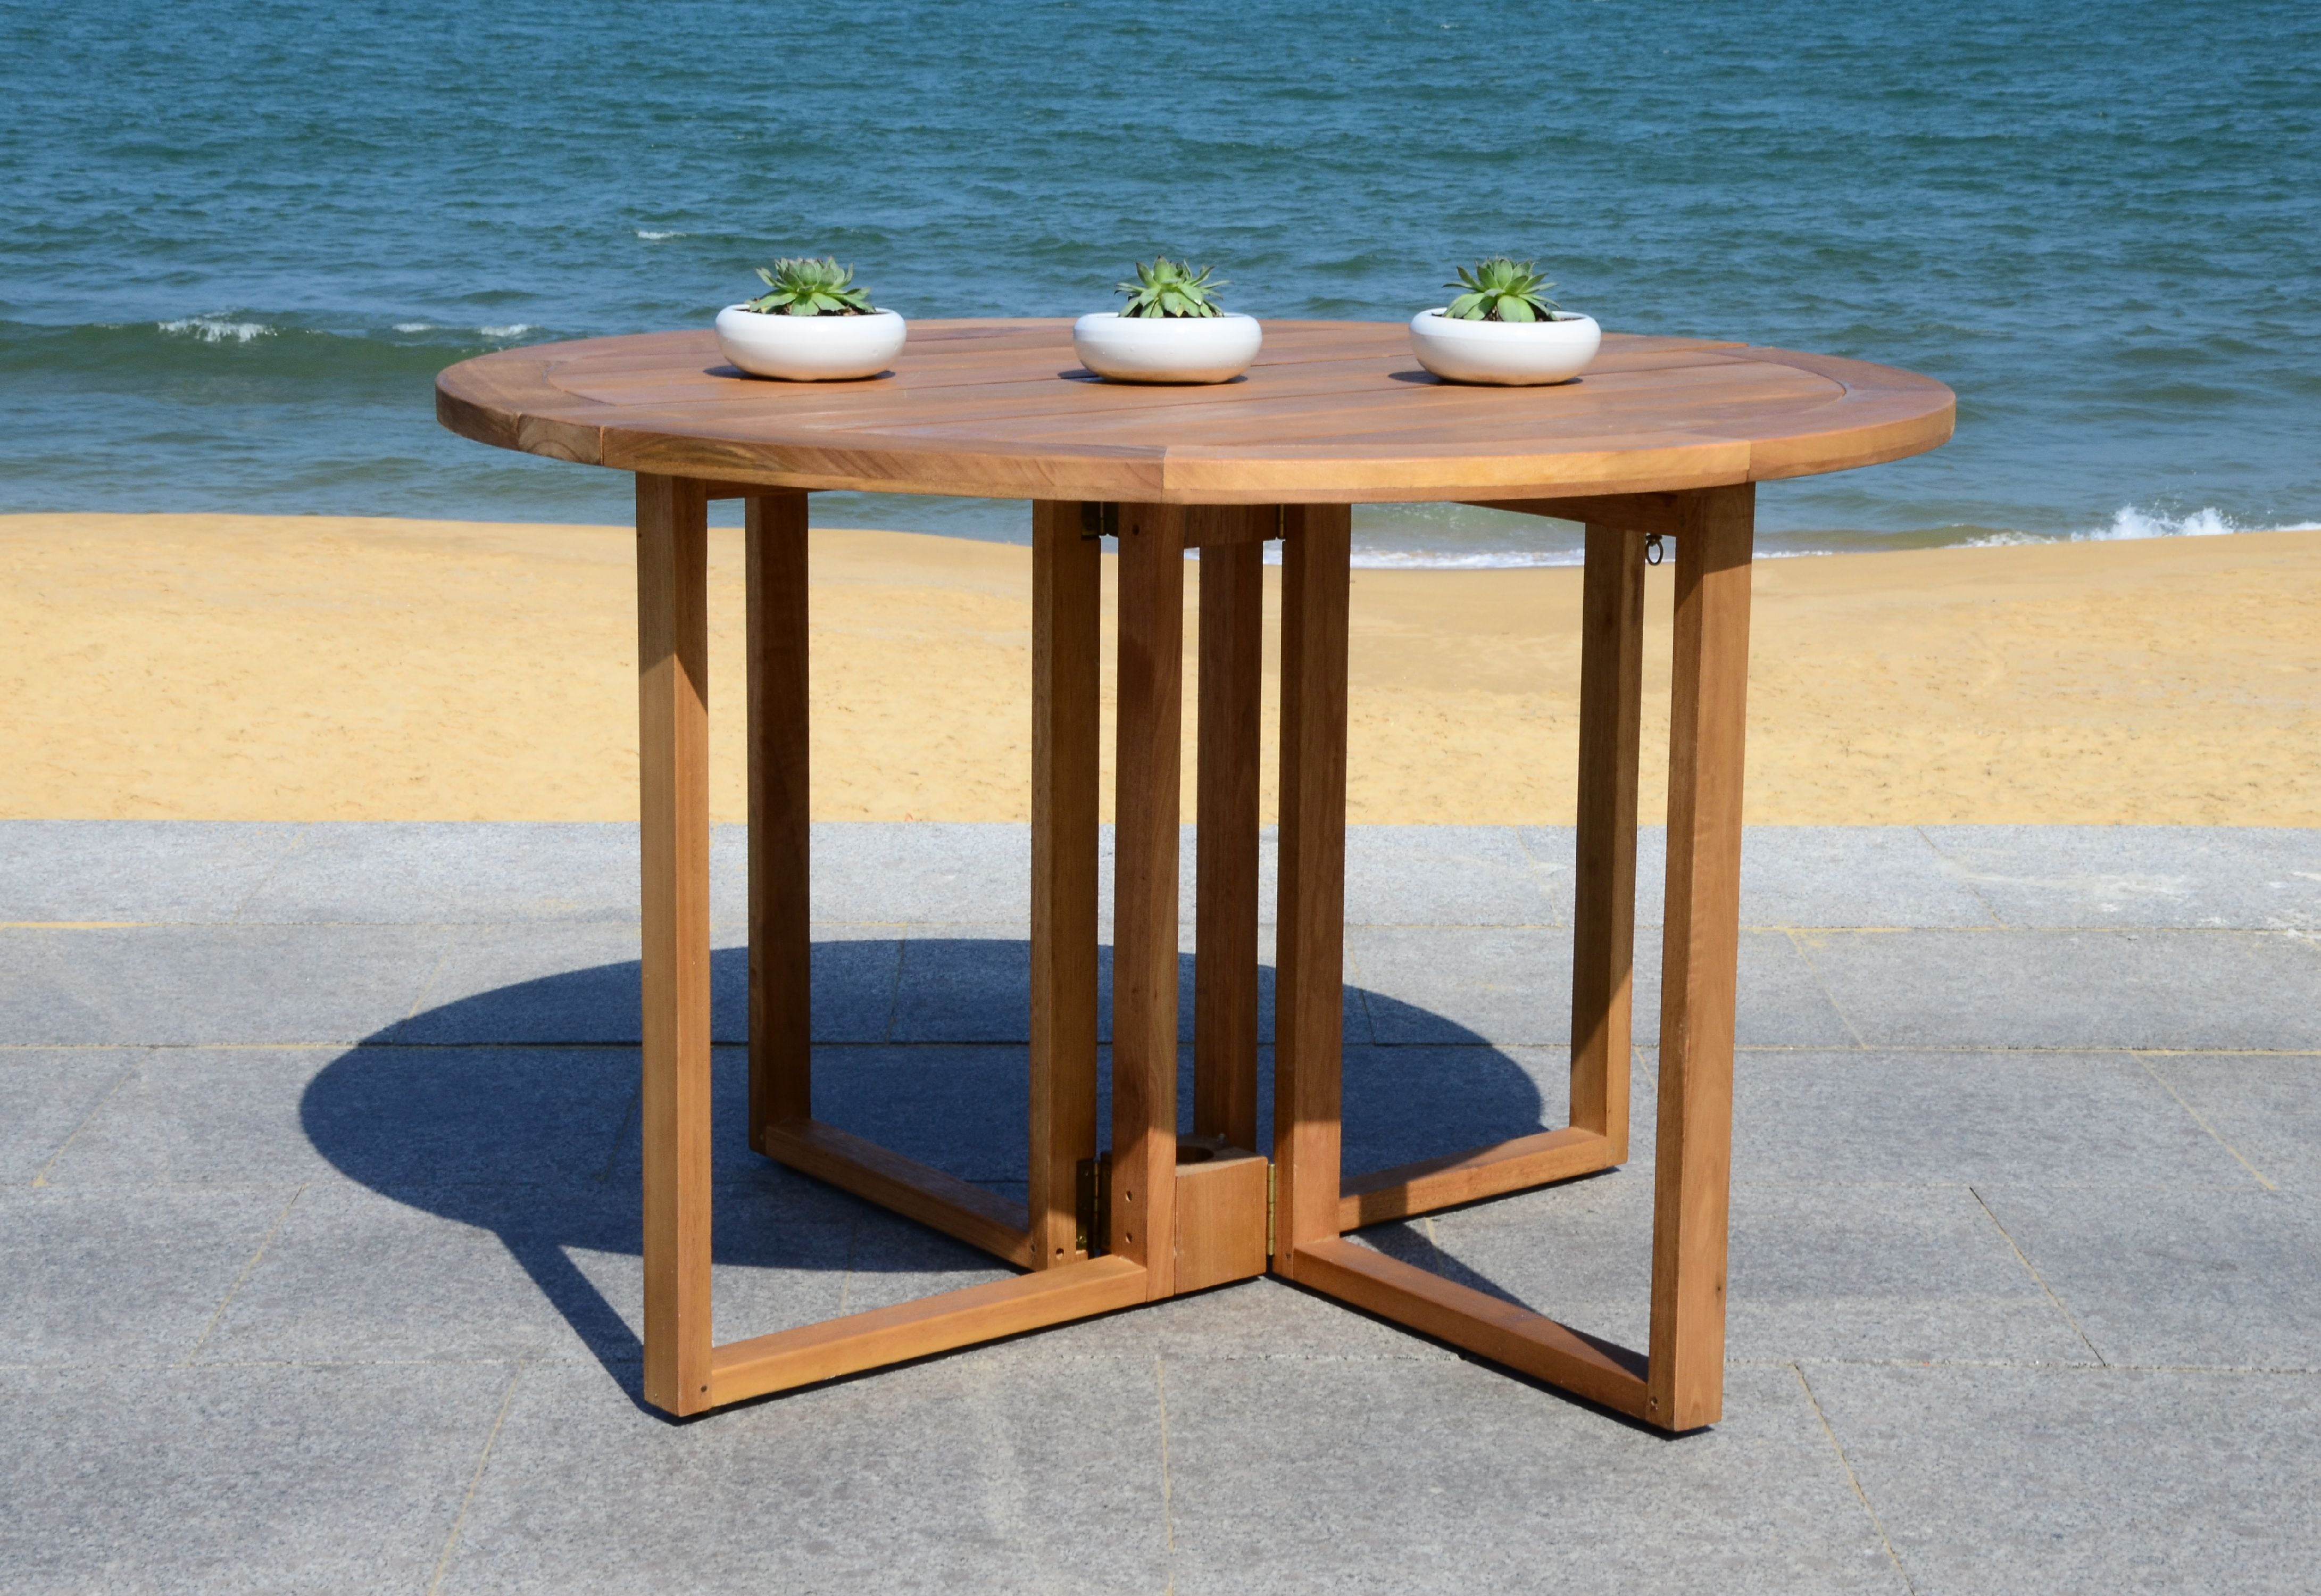 Foldable round dining table